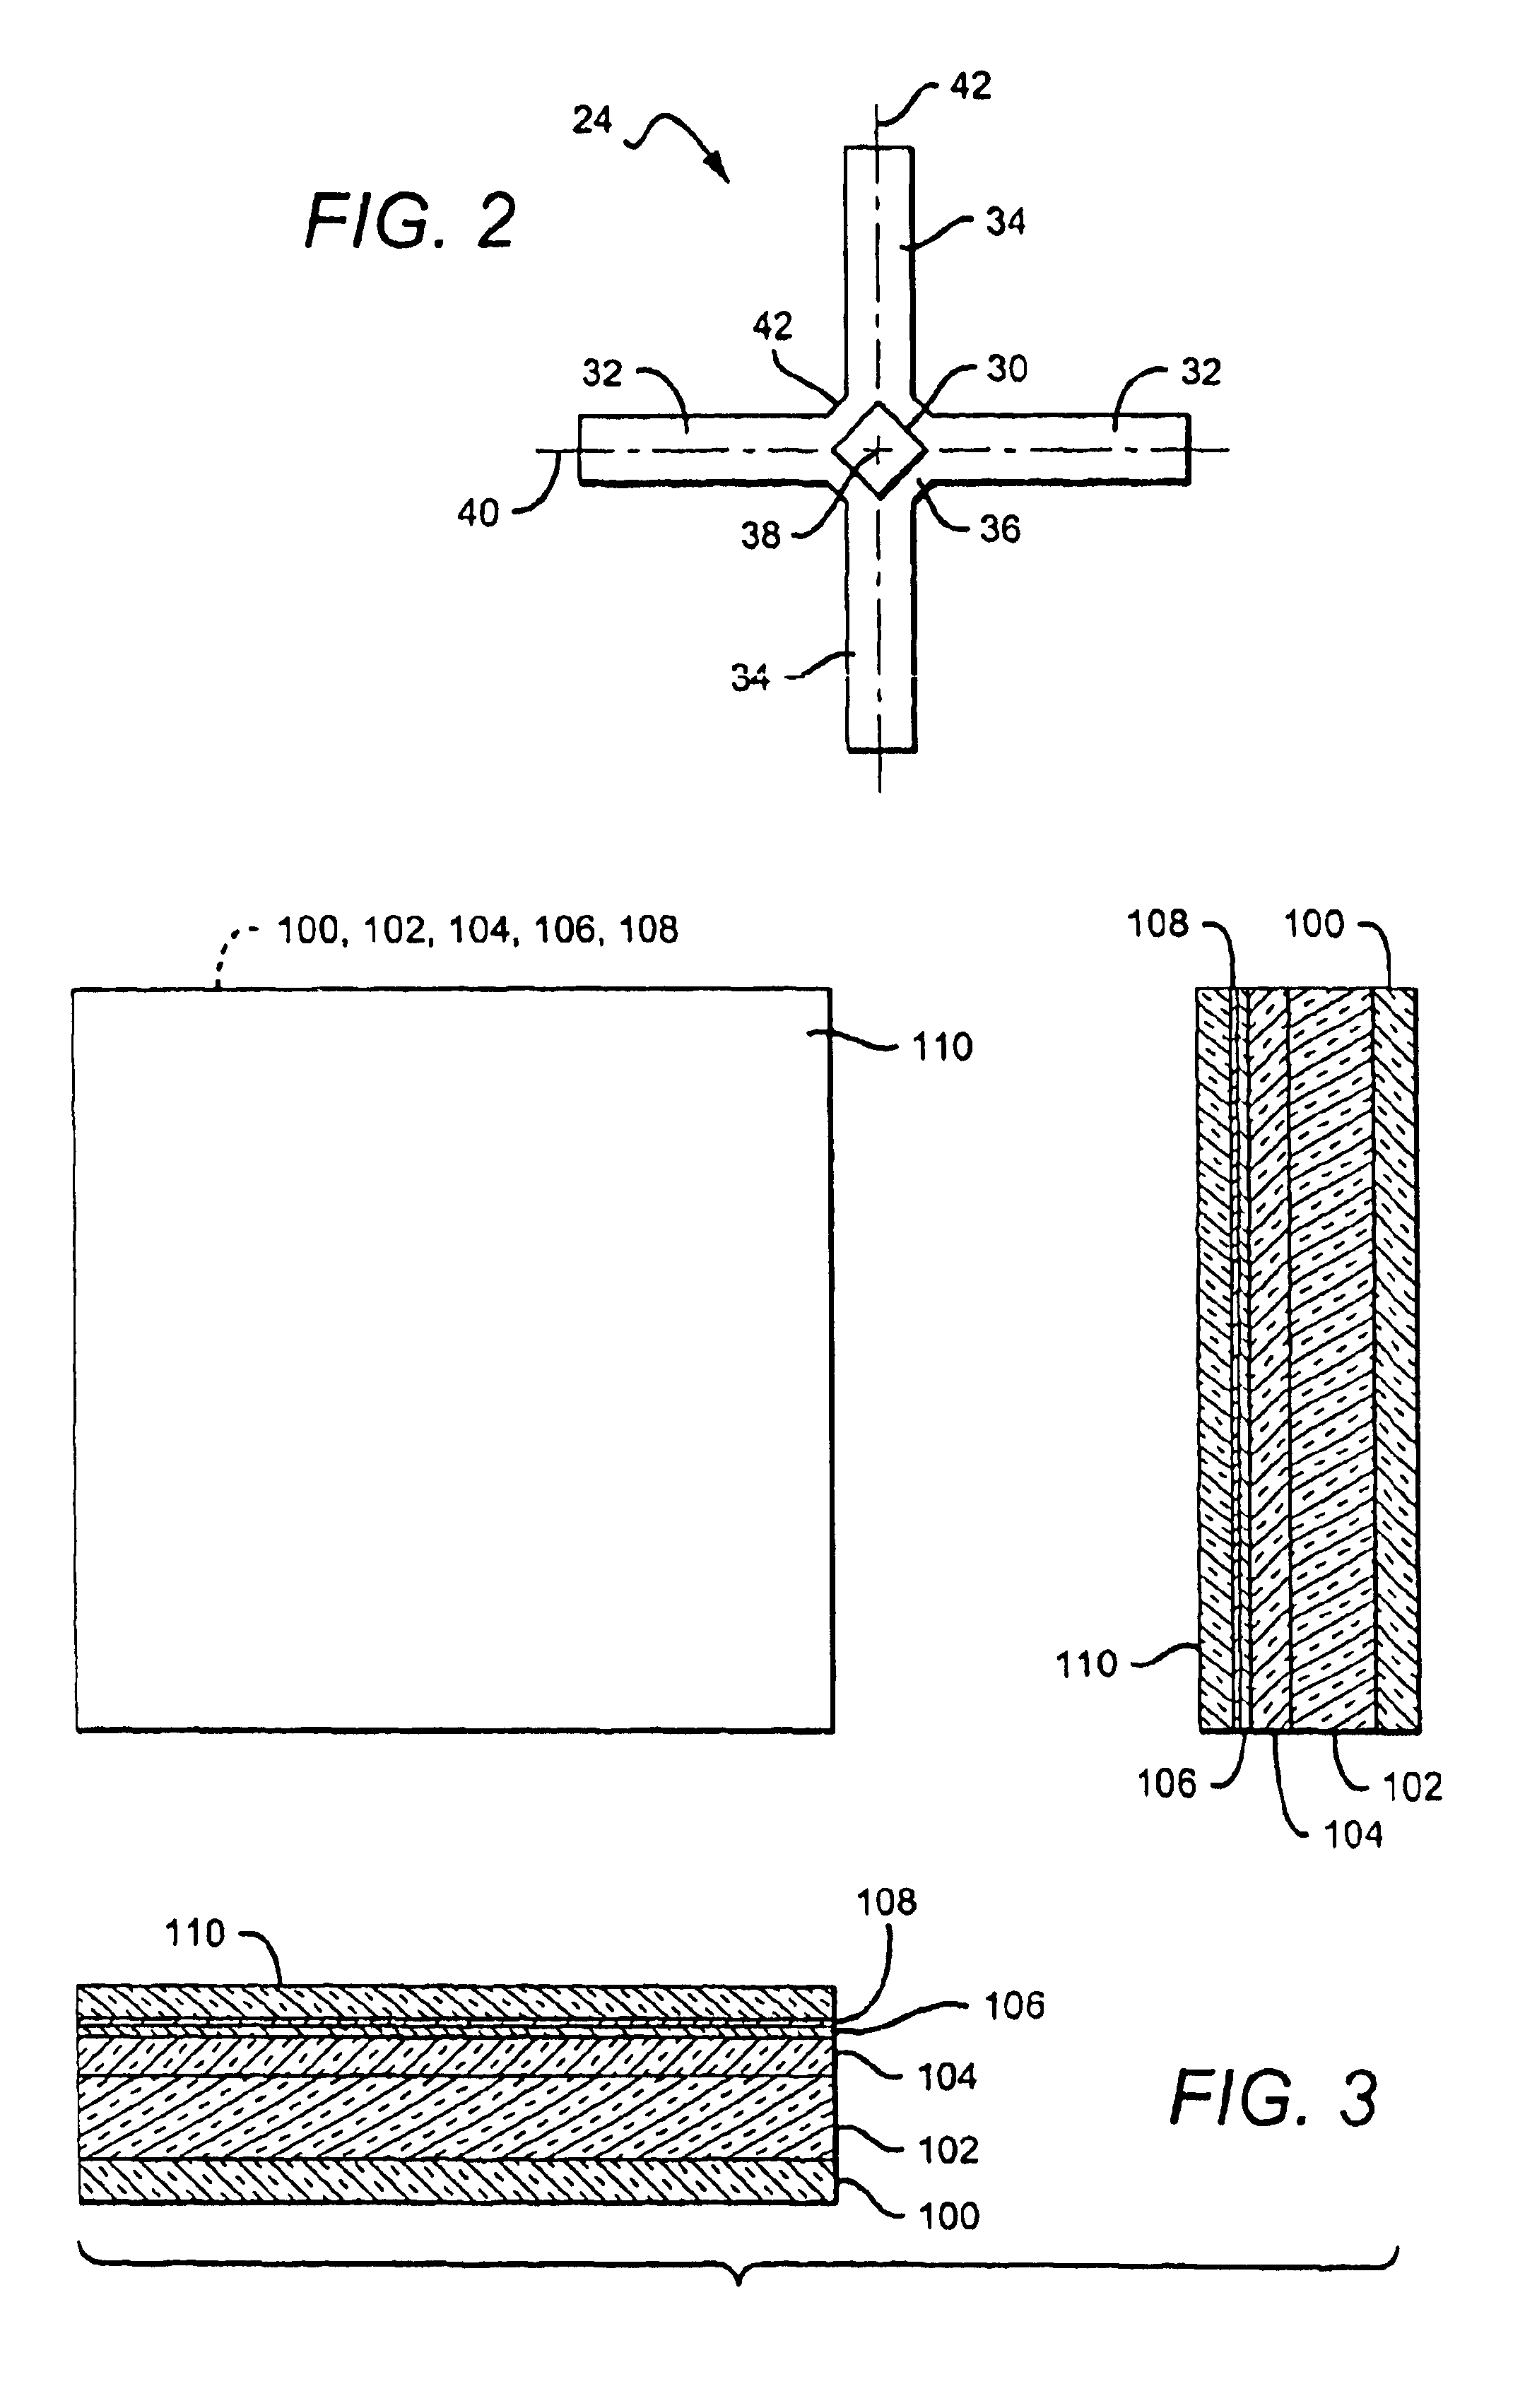 BJT device configuration and fabrication method with reduced emitter width